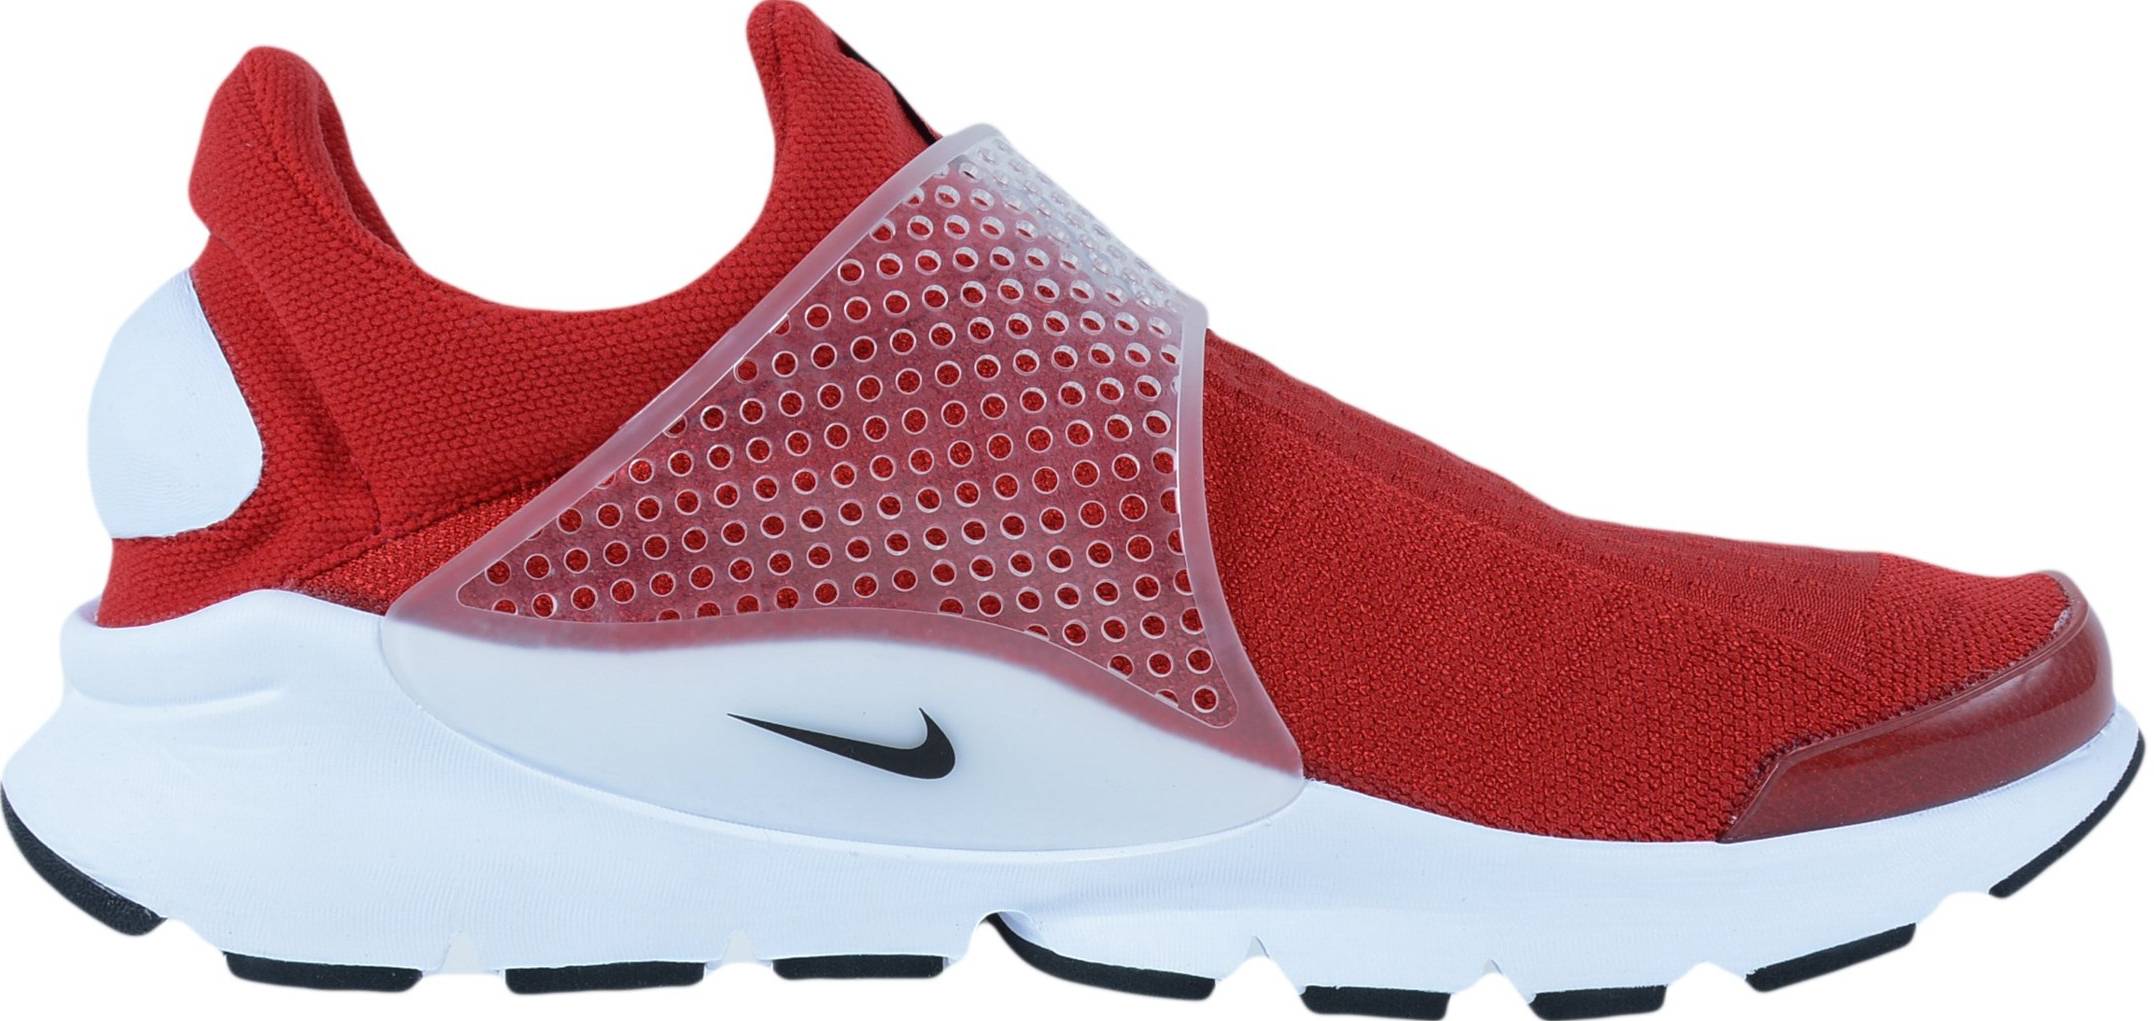 red fusion jordan retro size 10 sneakers in 10 colors (only £80) | nike mall vomero 7 mens running shoes | Infrastructure-intelligenceShops